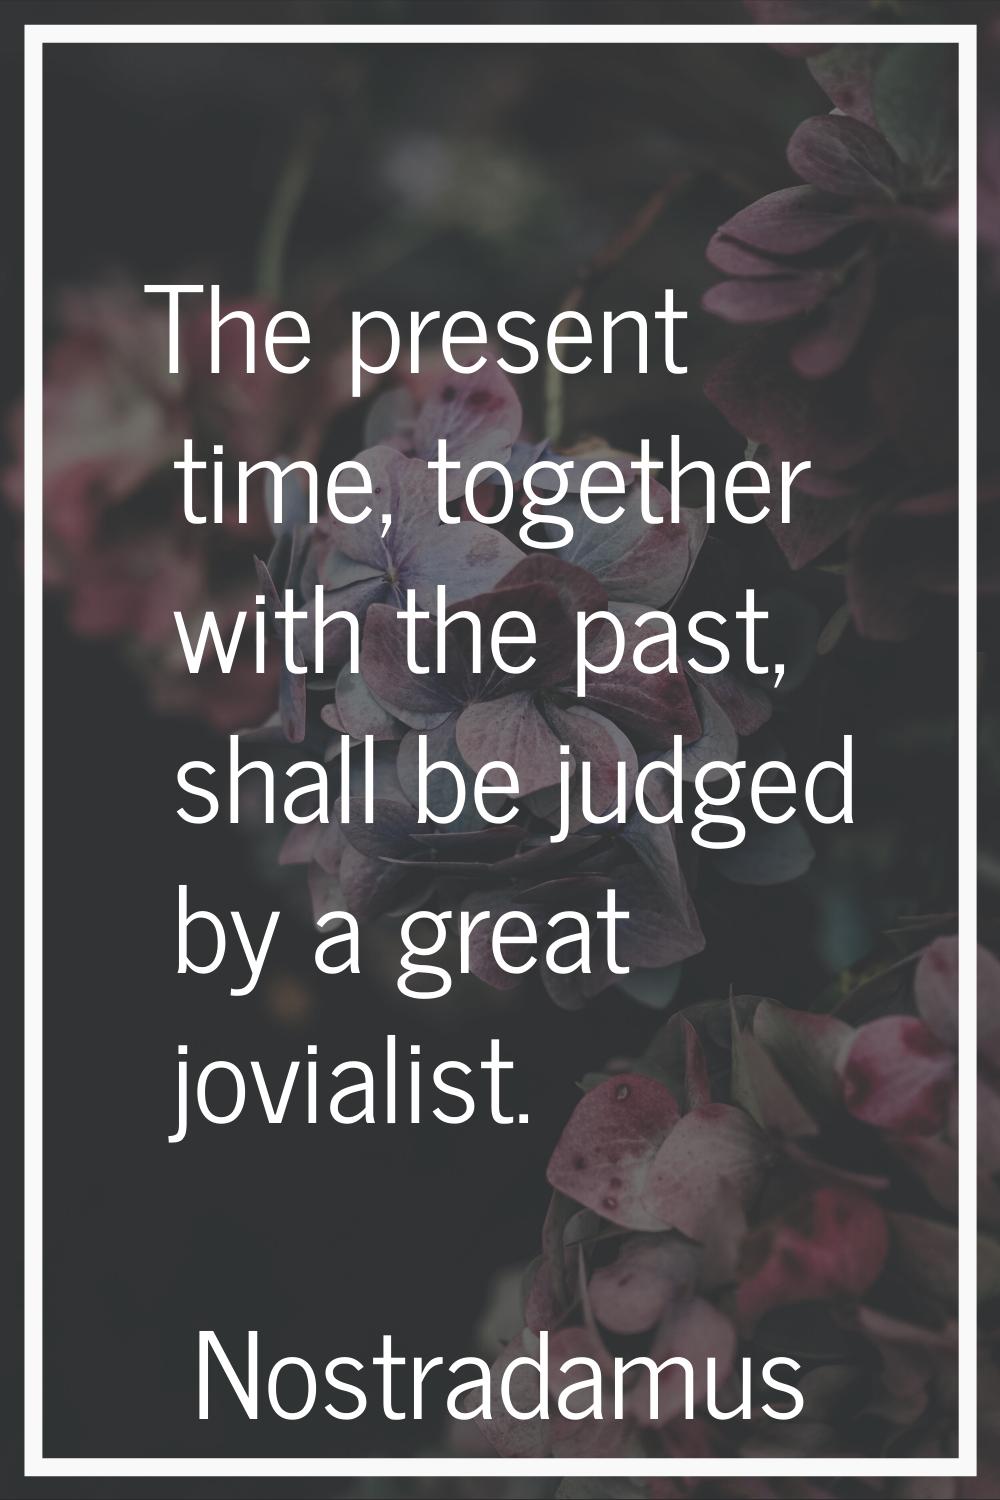 The present time, together with the past, shall be judged by a great jovialist.